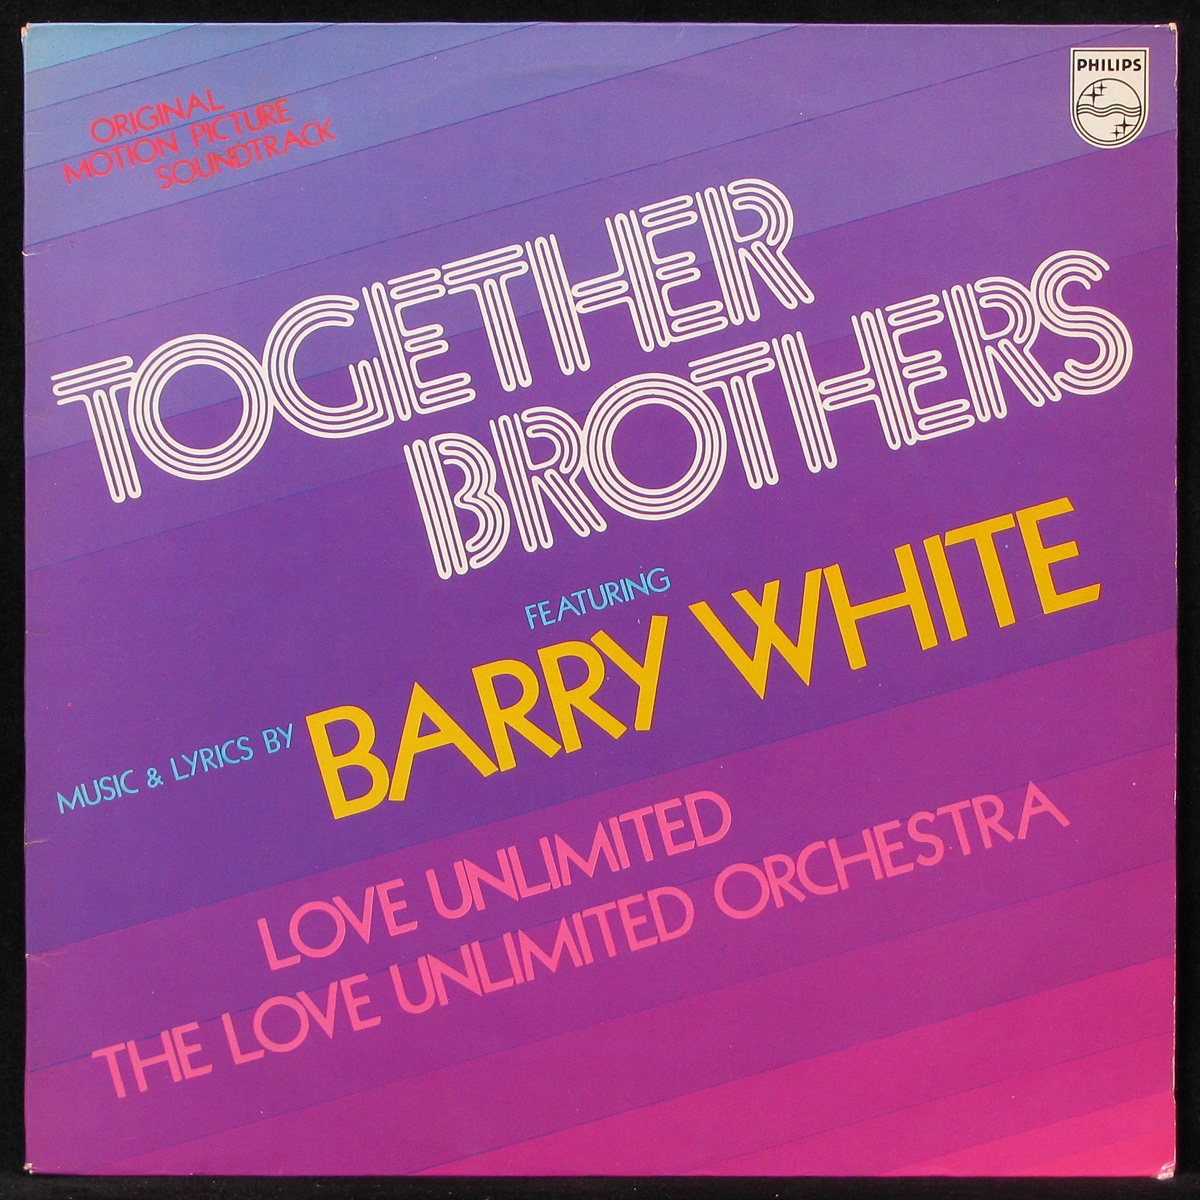 Barry White певец. Barry White and Love Unlimited Orchestra - Grand Gala. Love Unlimited Orchestra. Love Unlimited Barry White foto.